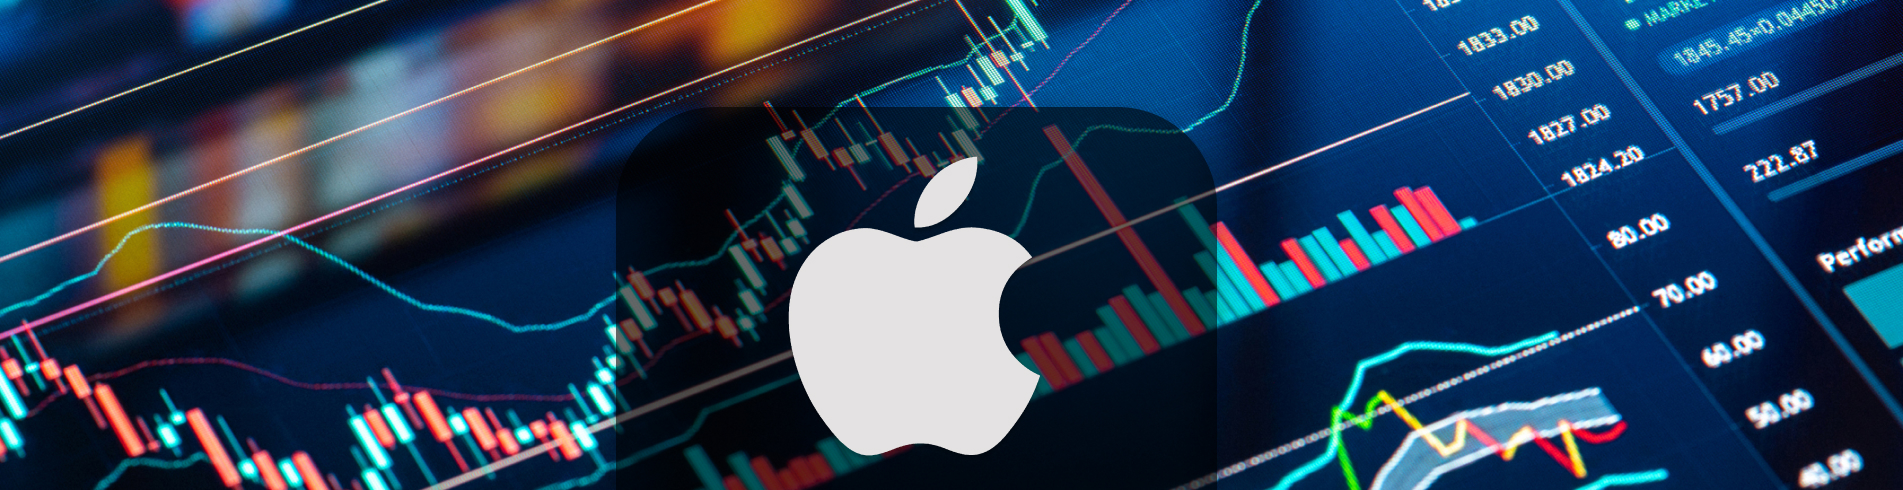 Apple Stocks On The Brink Of 10% Correction